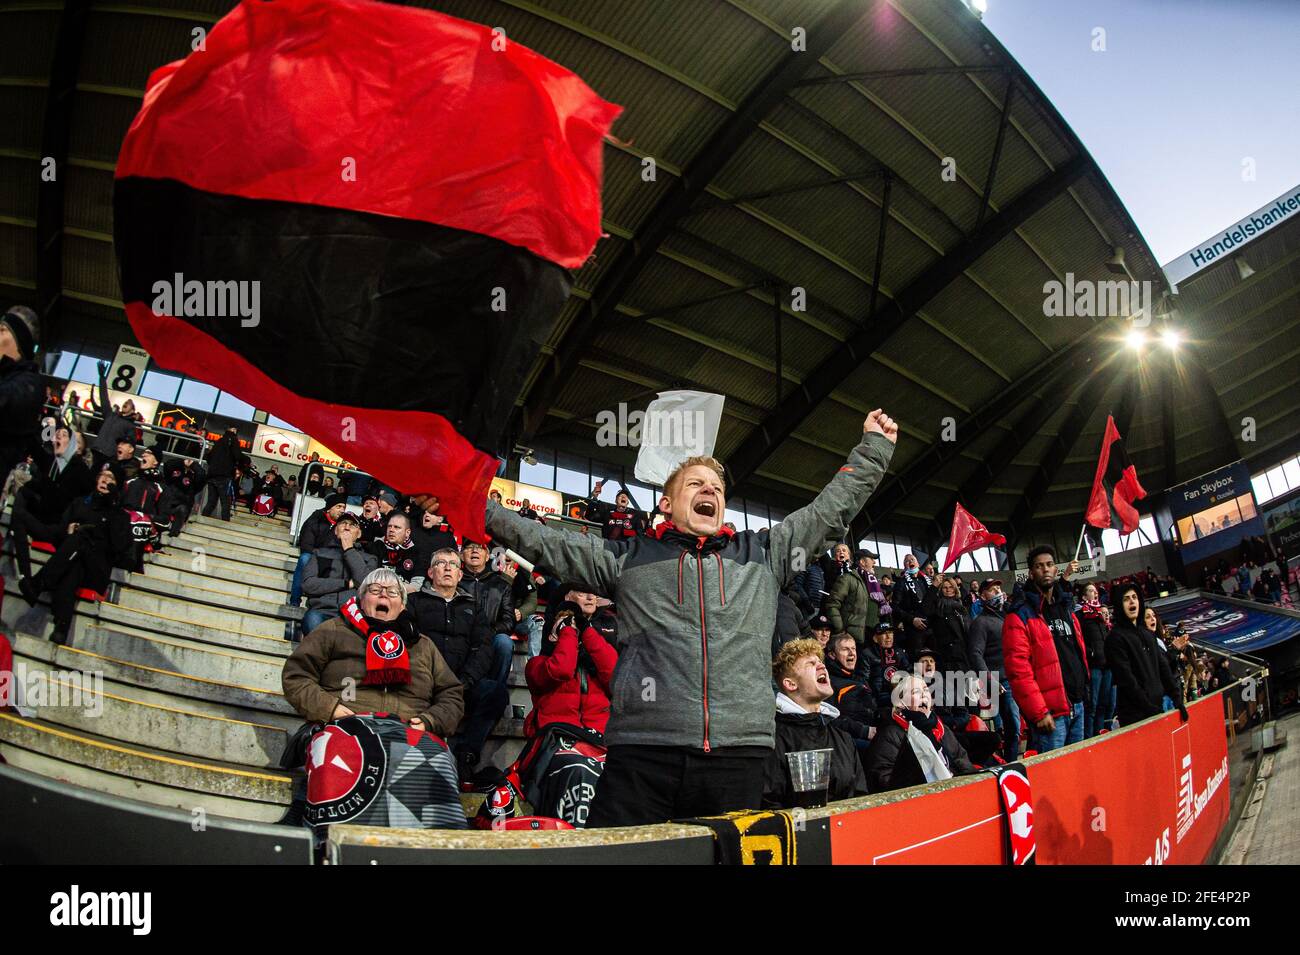 Herning, Denmark. 22nd, April 2021. Football fans of FC Midtjylland  celebrate af goal at MCH Arena during the 3F Superliga match between FC  Midtjylland and FC Copenhagen in Herning. (Photo credit: Gonzales